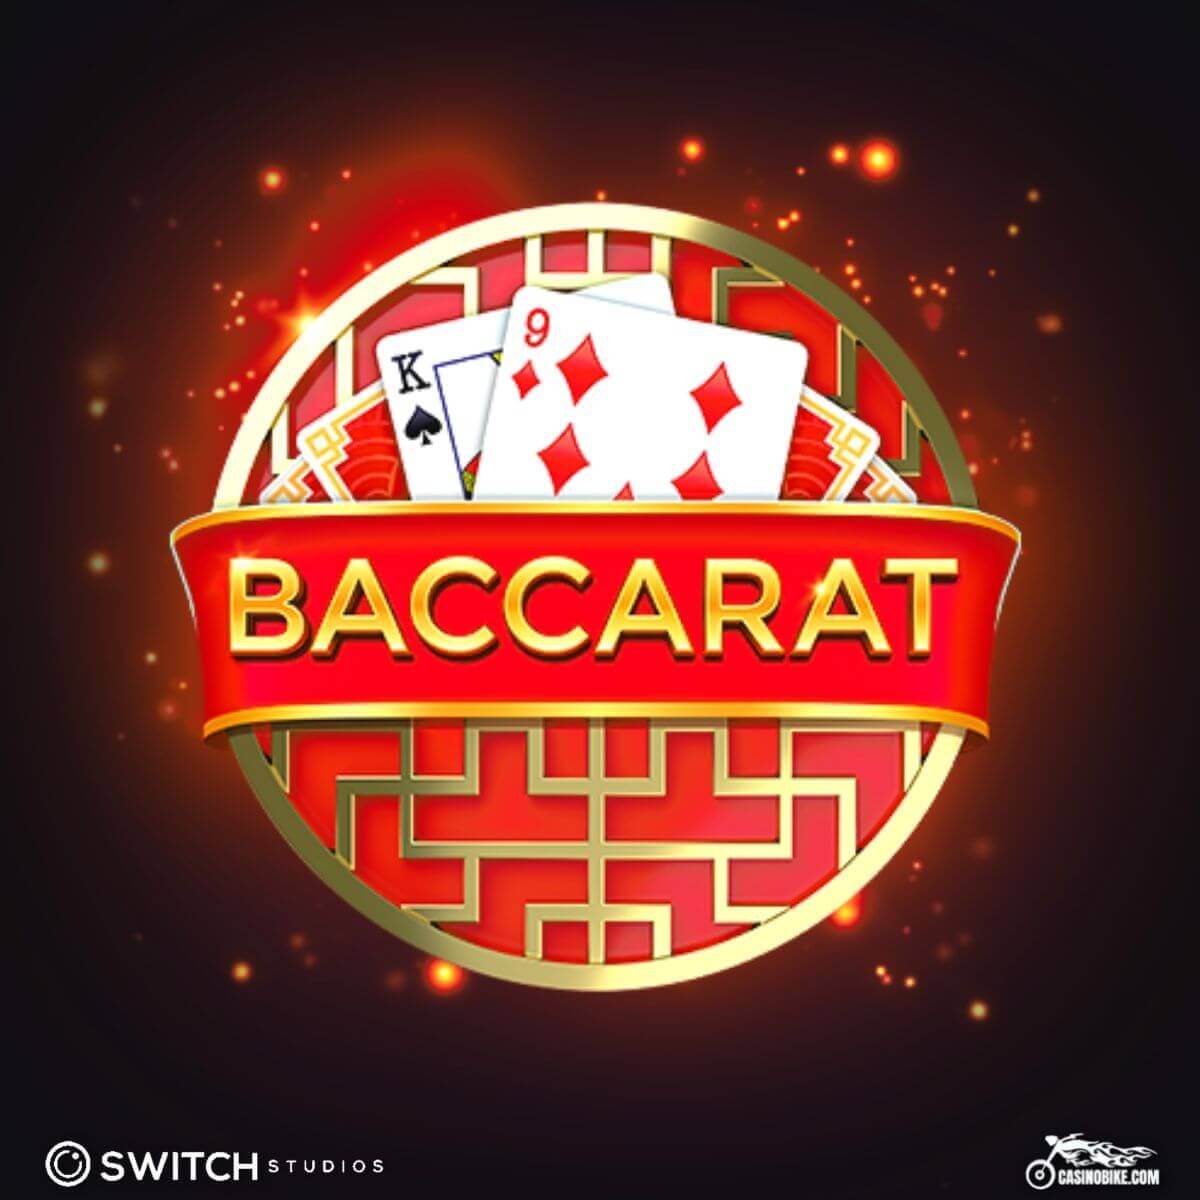 Baccarat by Switch Studios